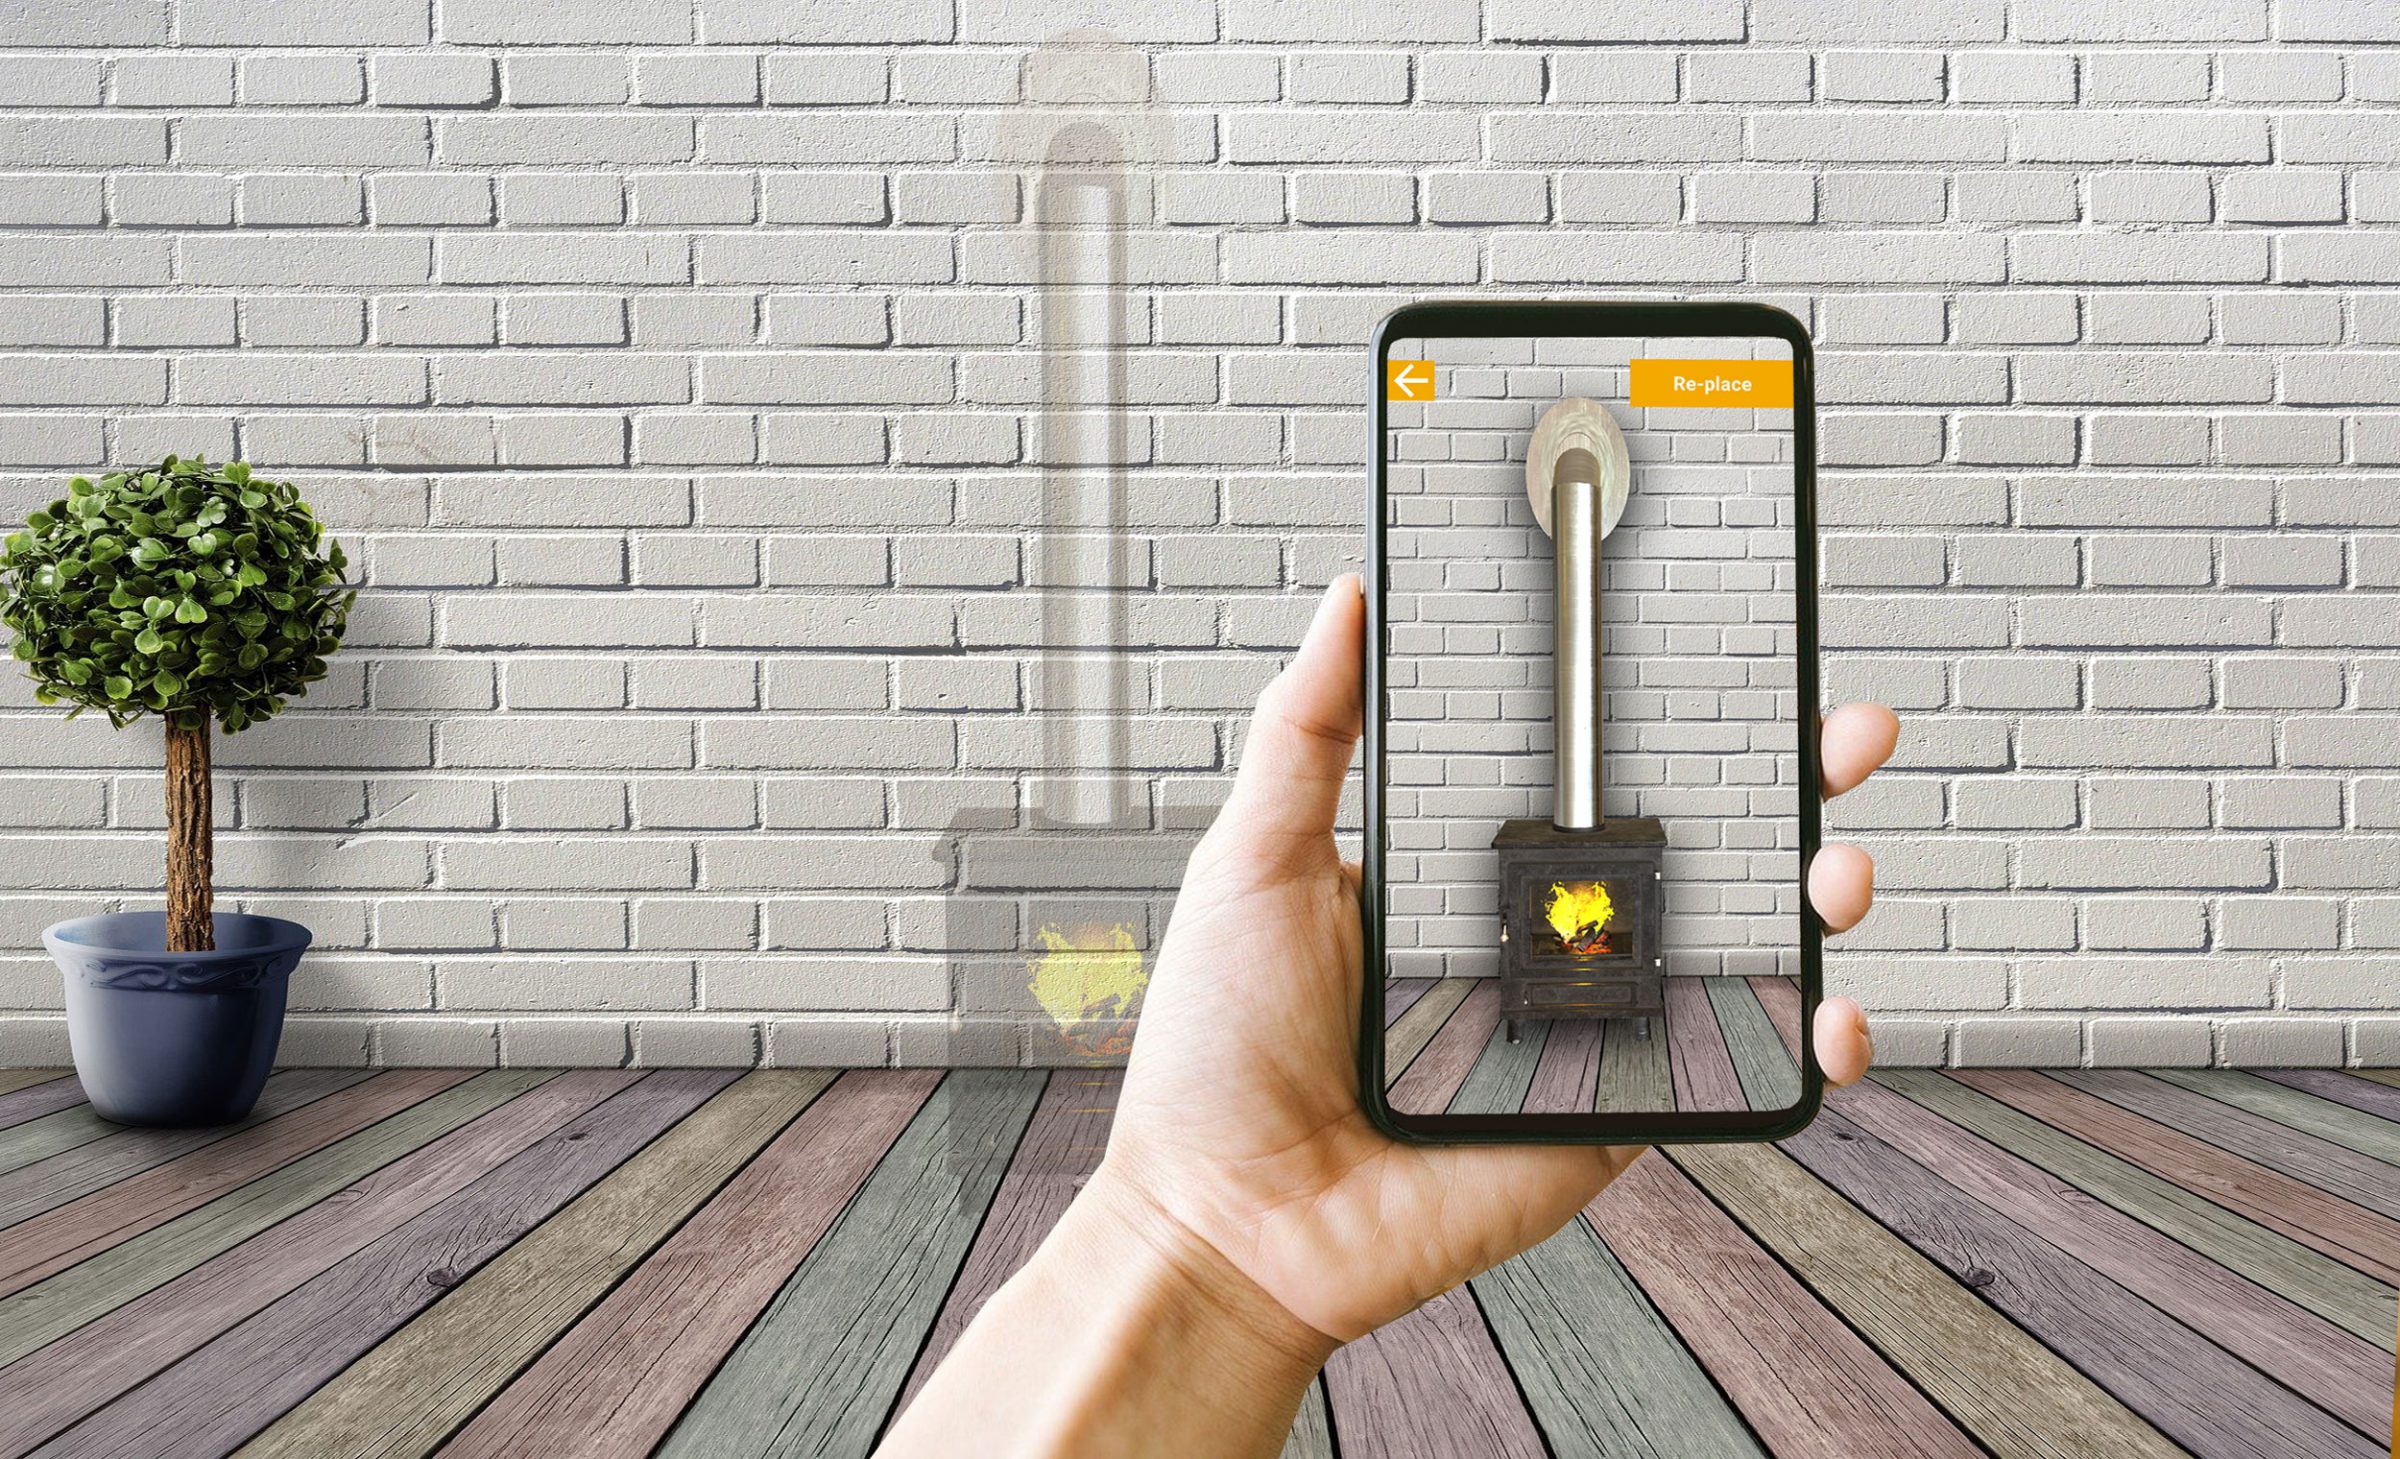 A useful app for homeowners and installers to visualise a free-standing stove installation. @SchiedelUK